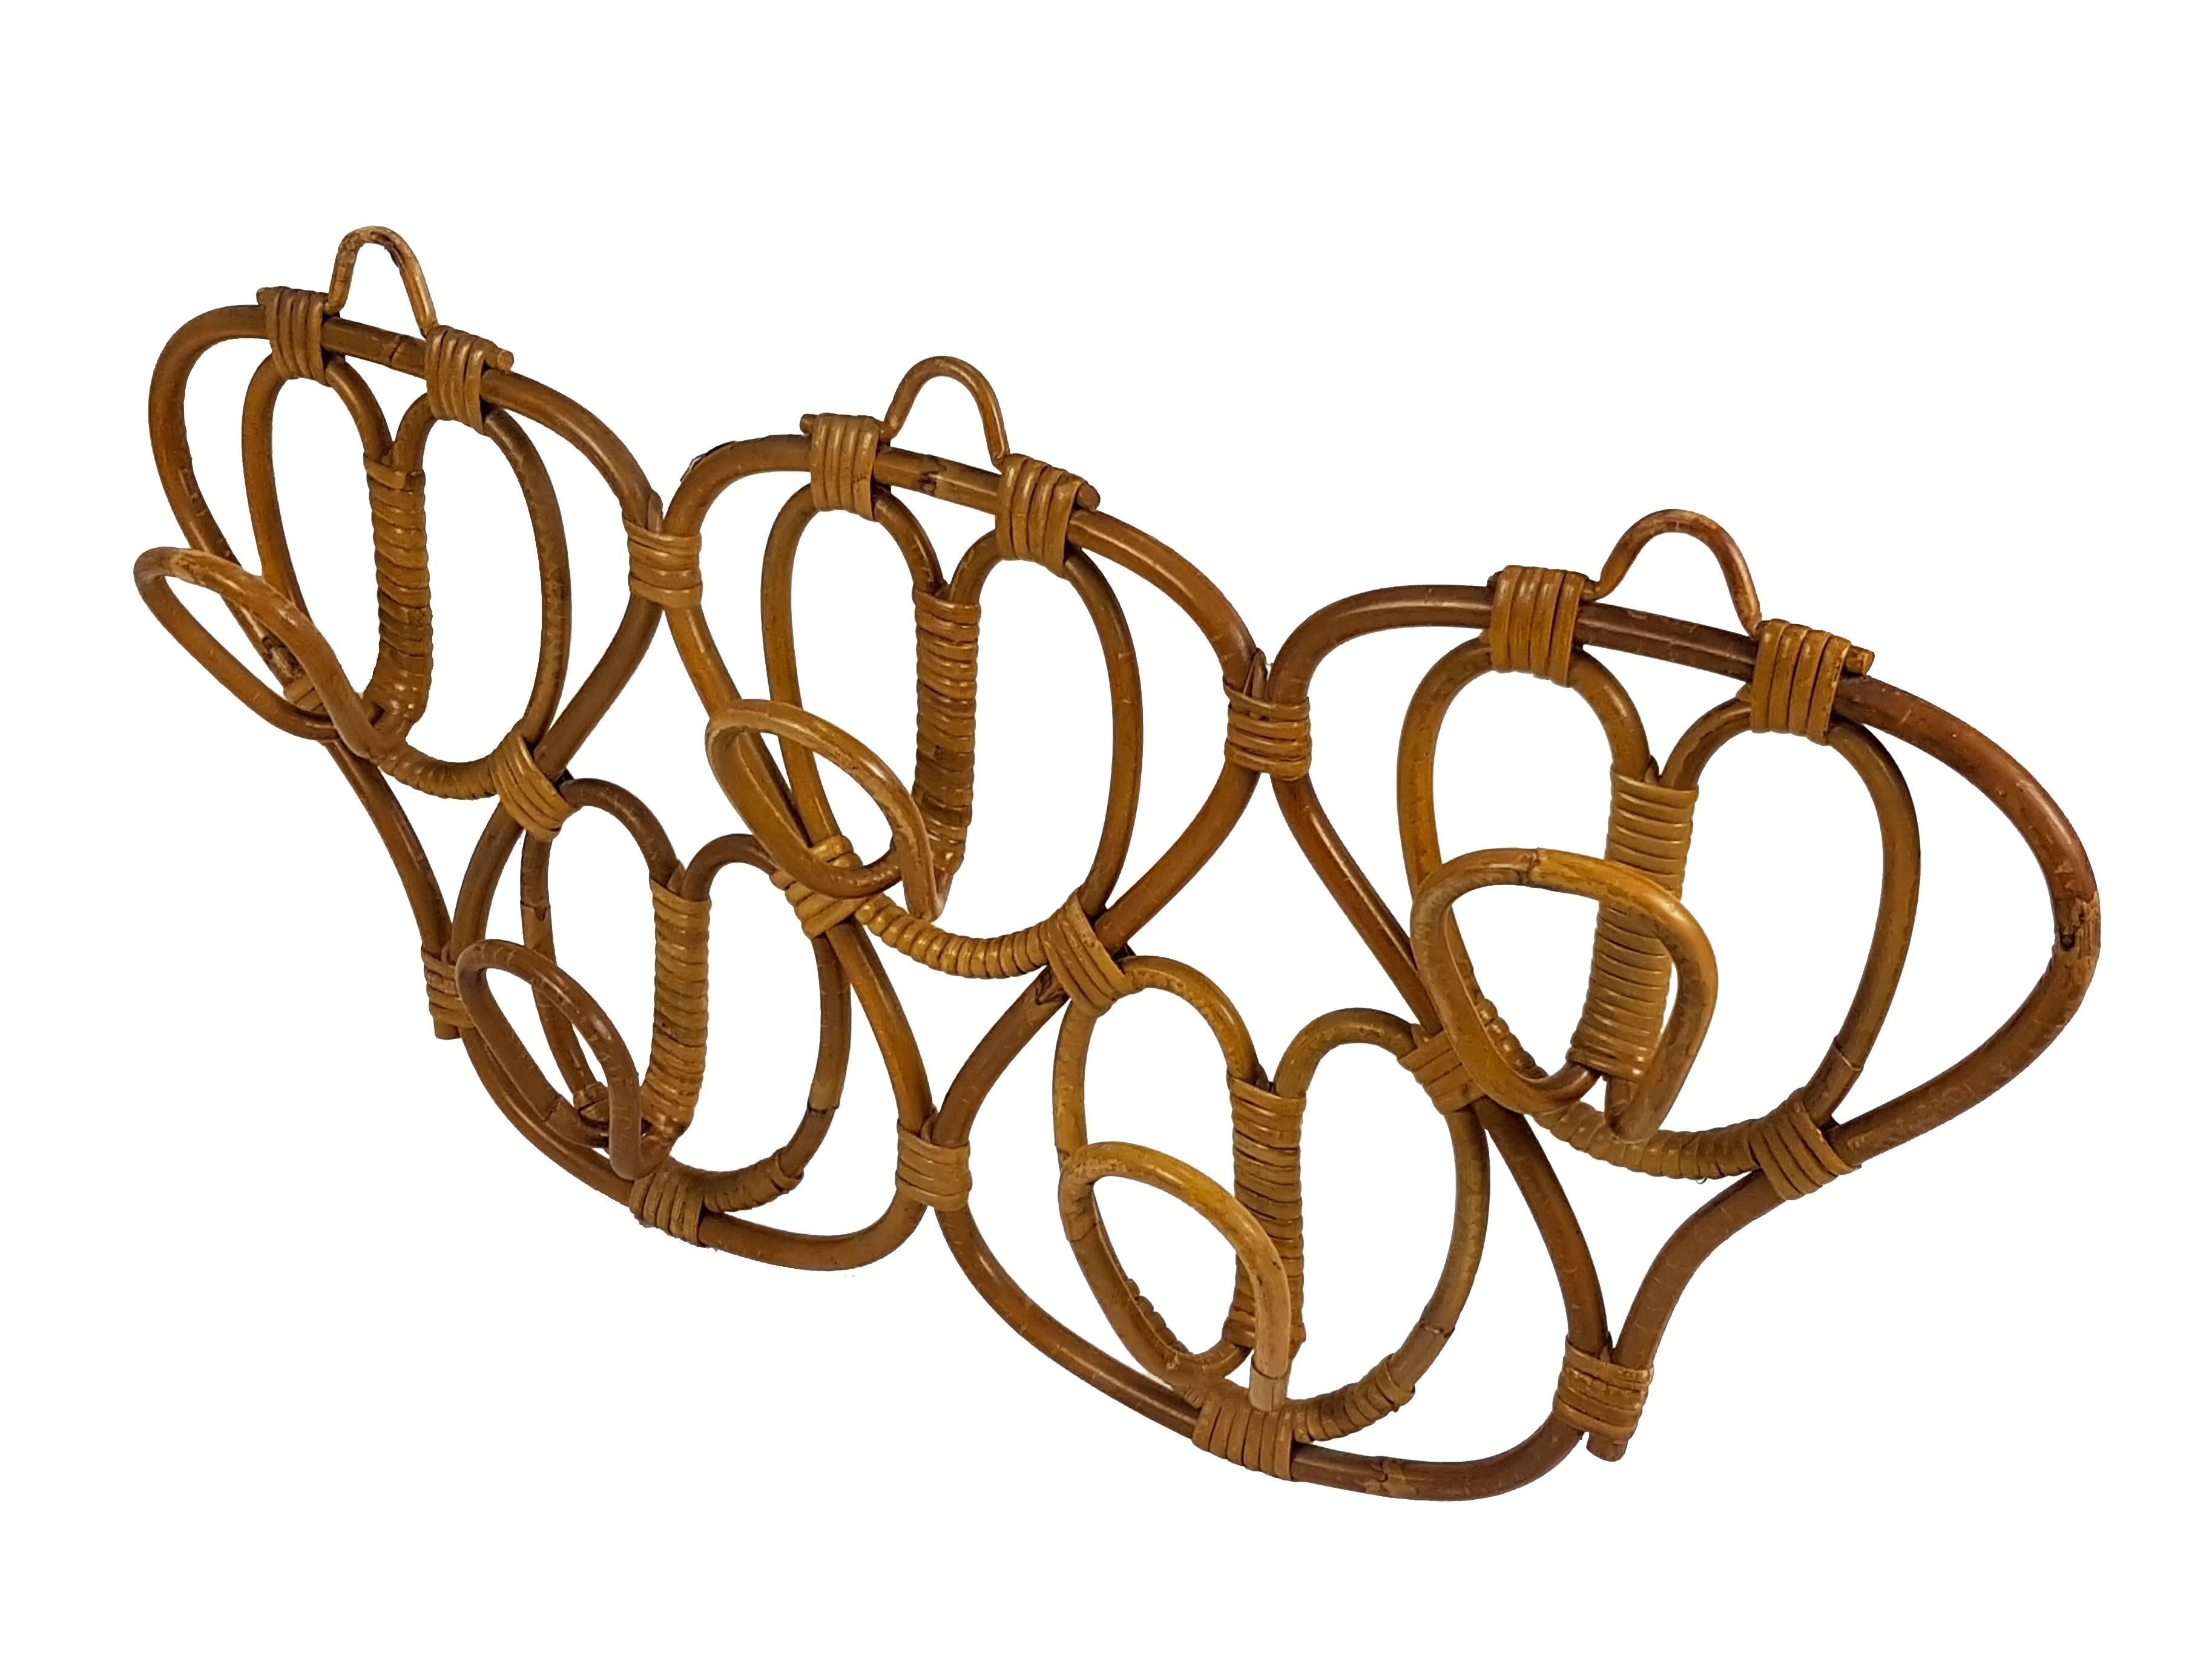 This italian coat rack was manufactured in Italy in the early 1960s. It features 5 usefull hooks and remains in very good condition.
Its design resembles a similar coat rack design by Franca Helg for Vittorio Bonacina in 1961 and published on Domus